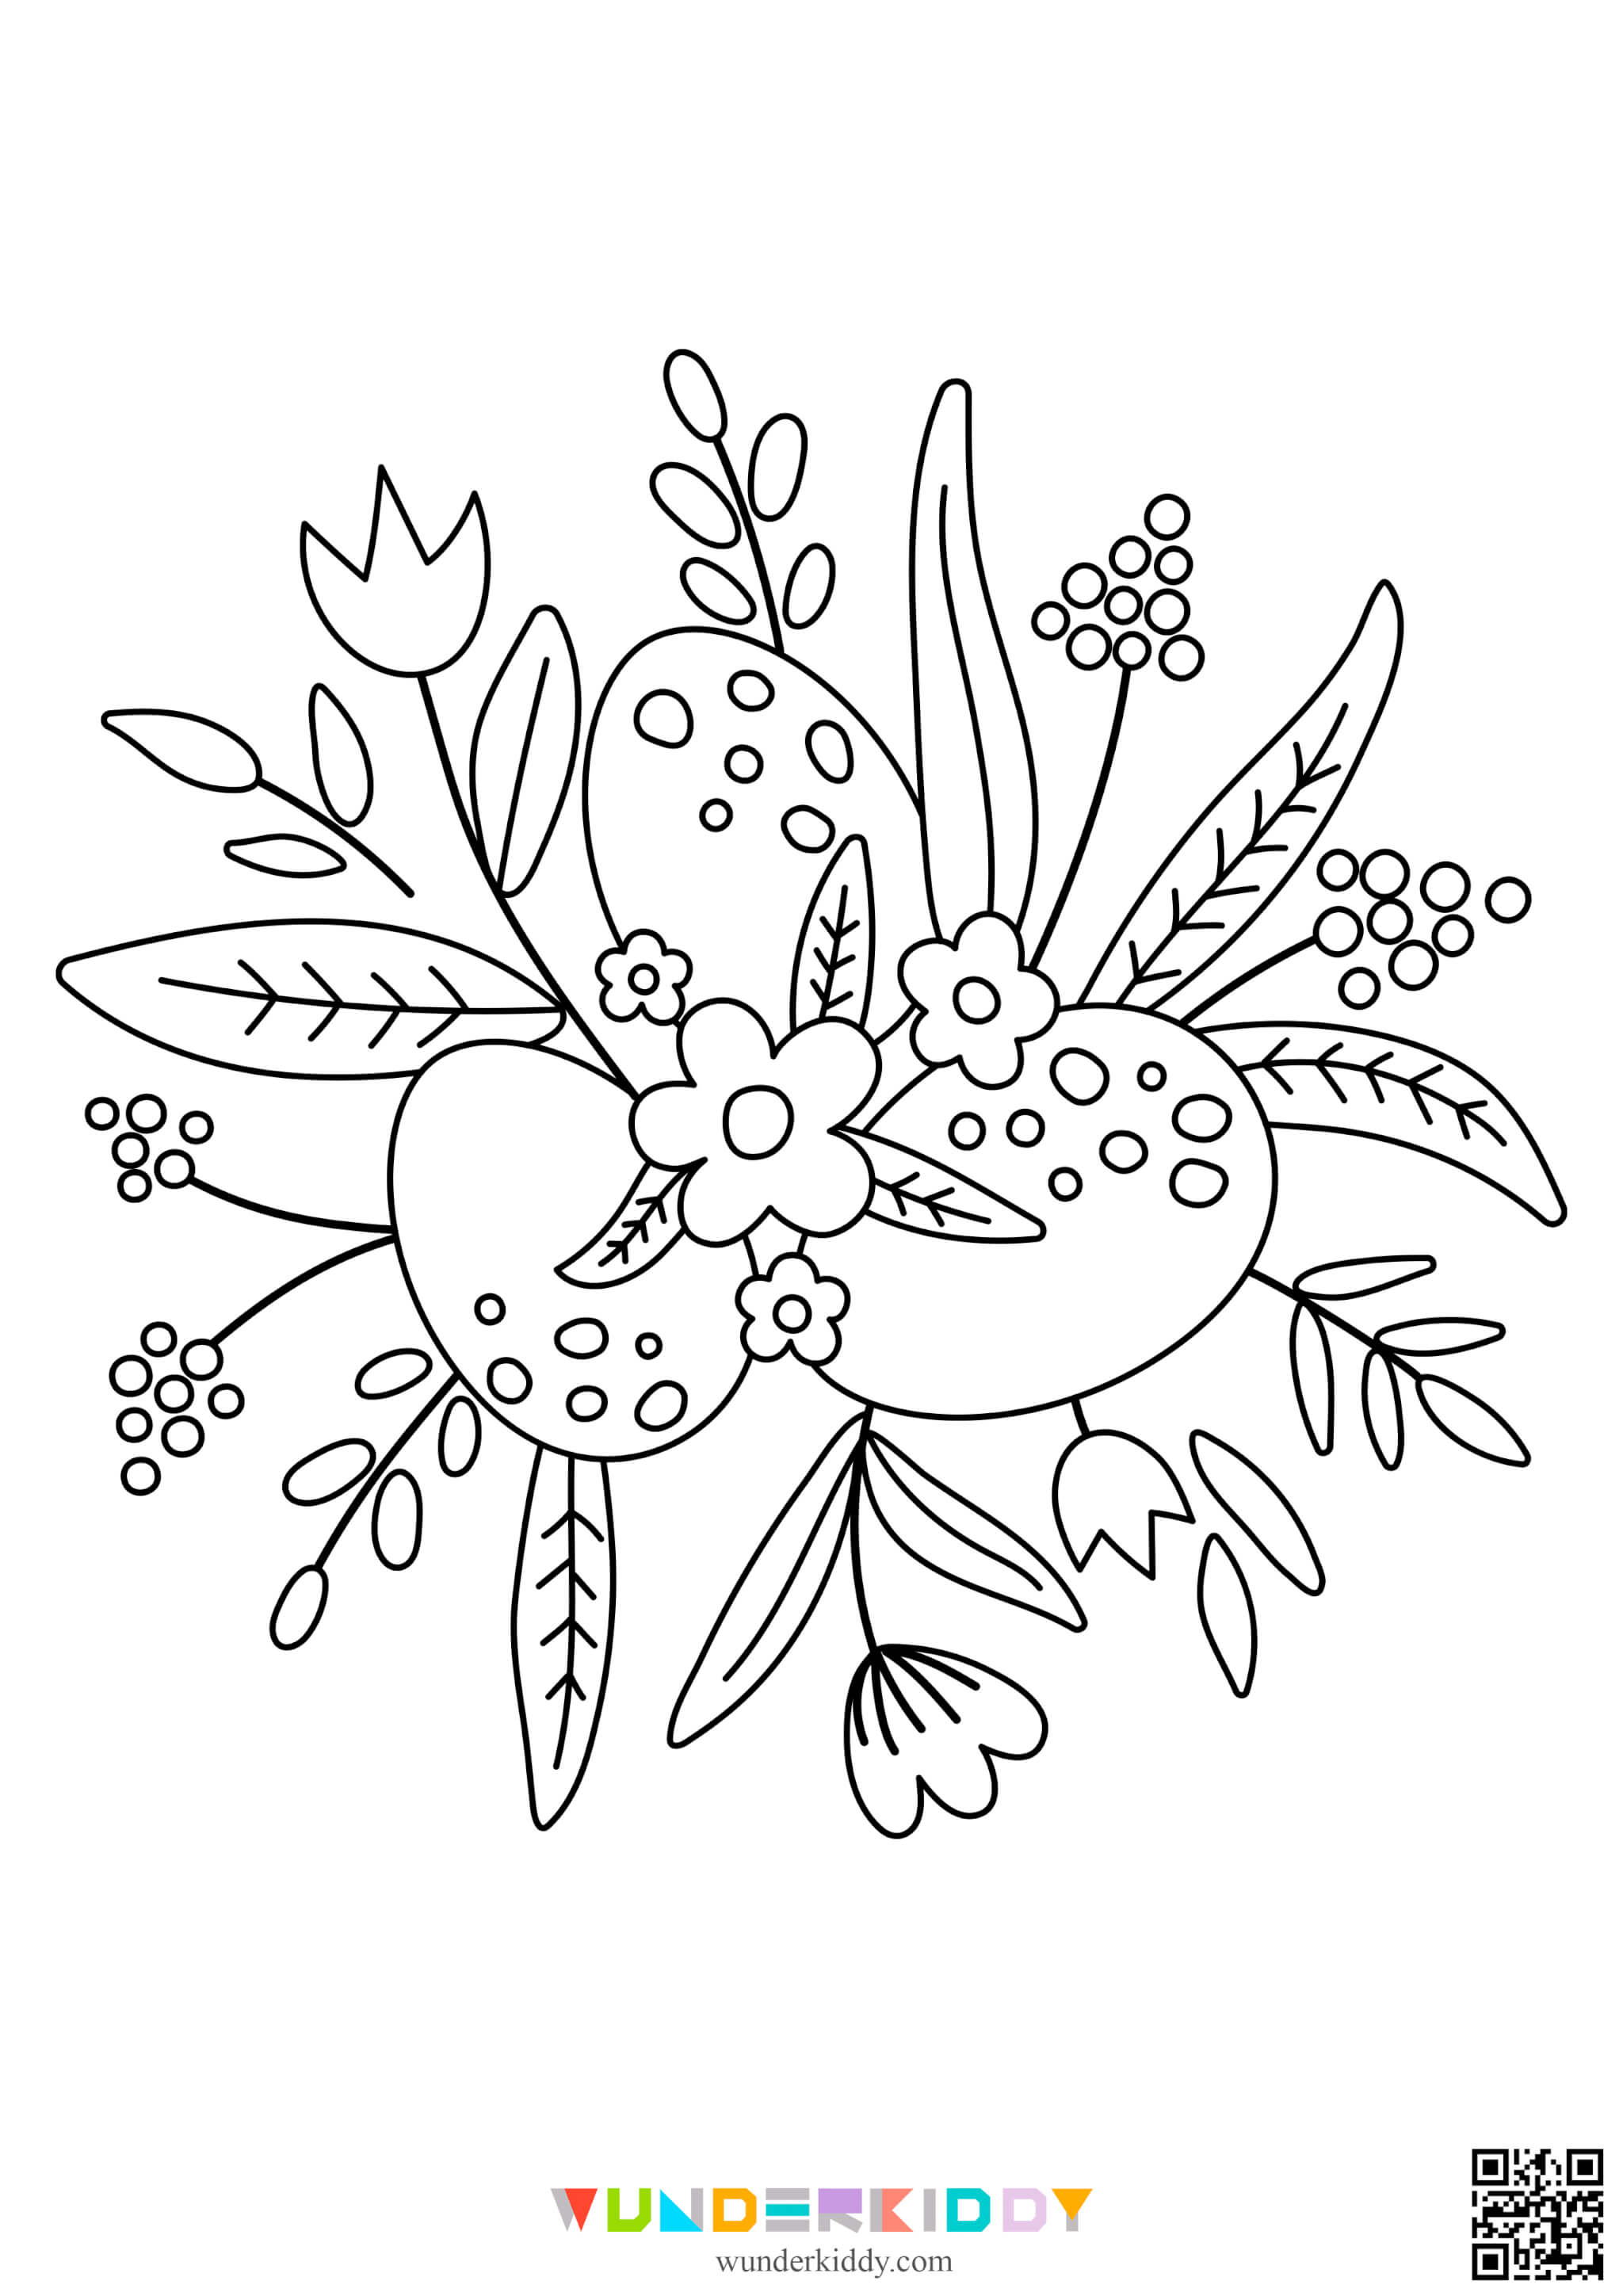 Easter Eggs Coloring Pages - Image 10